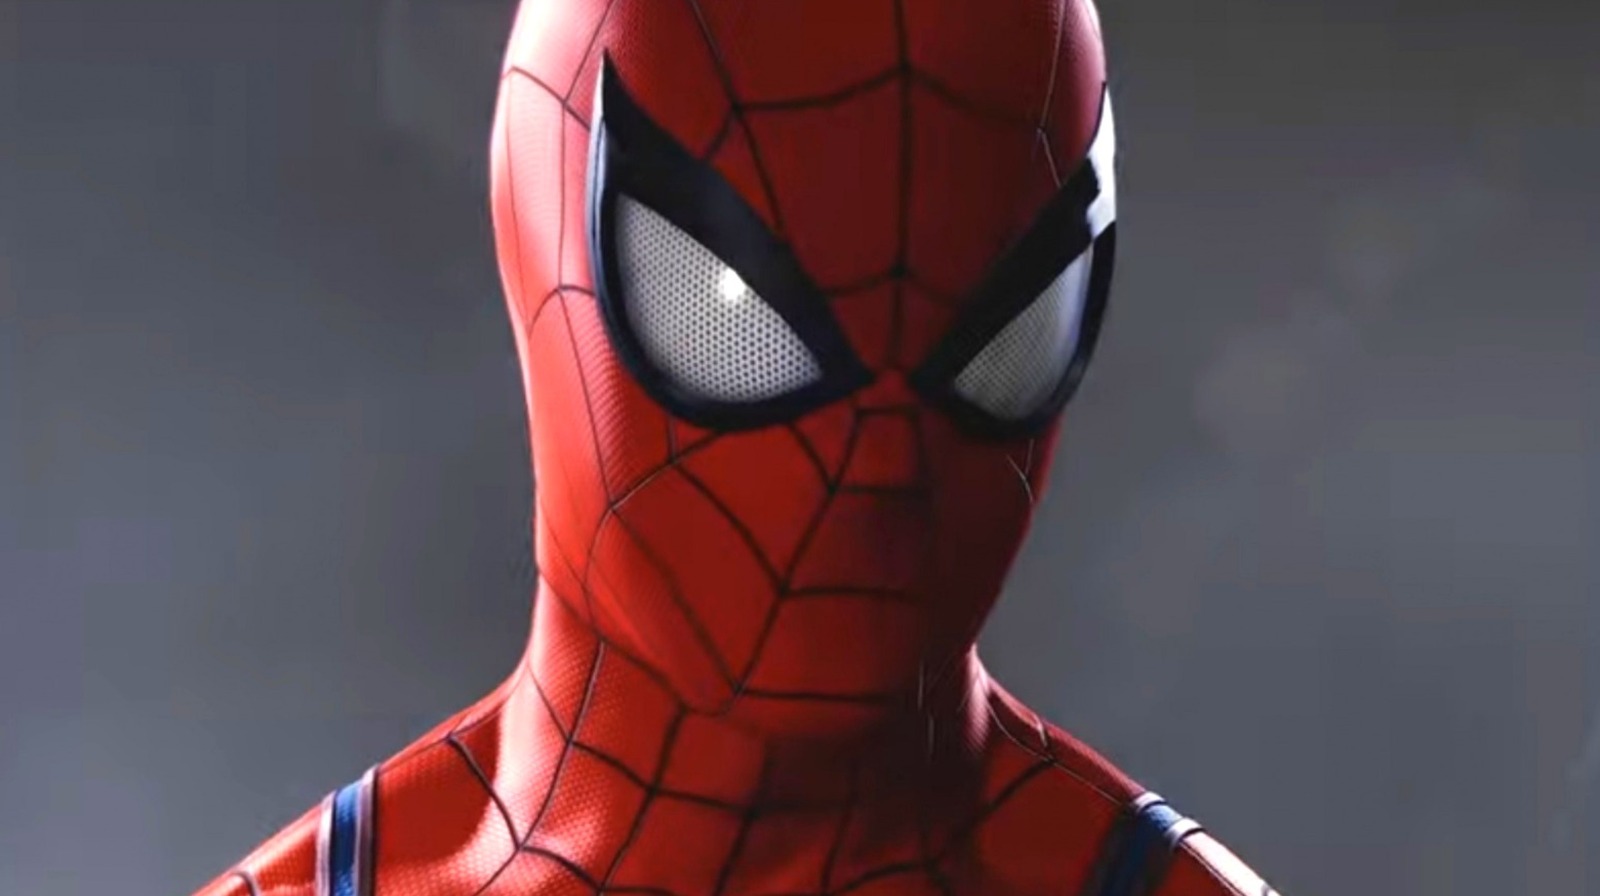 Marvel's Spider-Man Remastered – State of Play June 2022 Announce Trailer